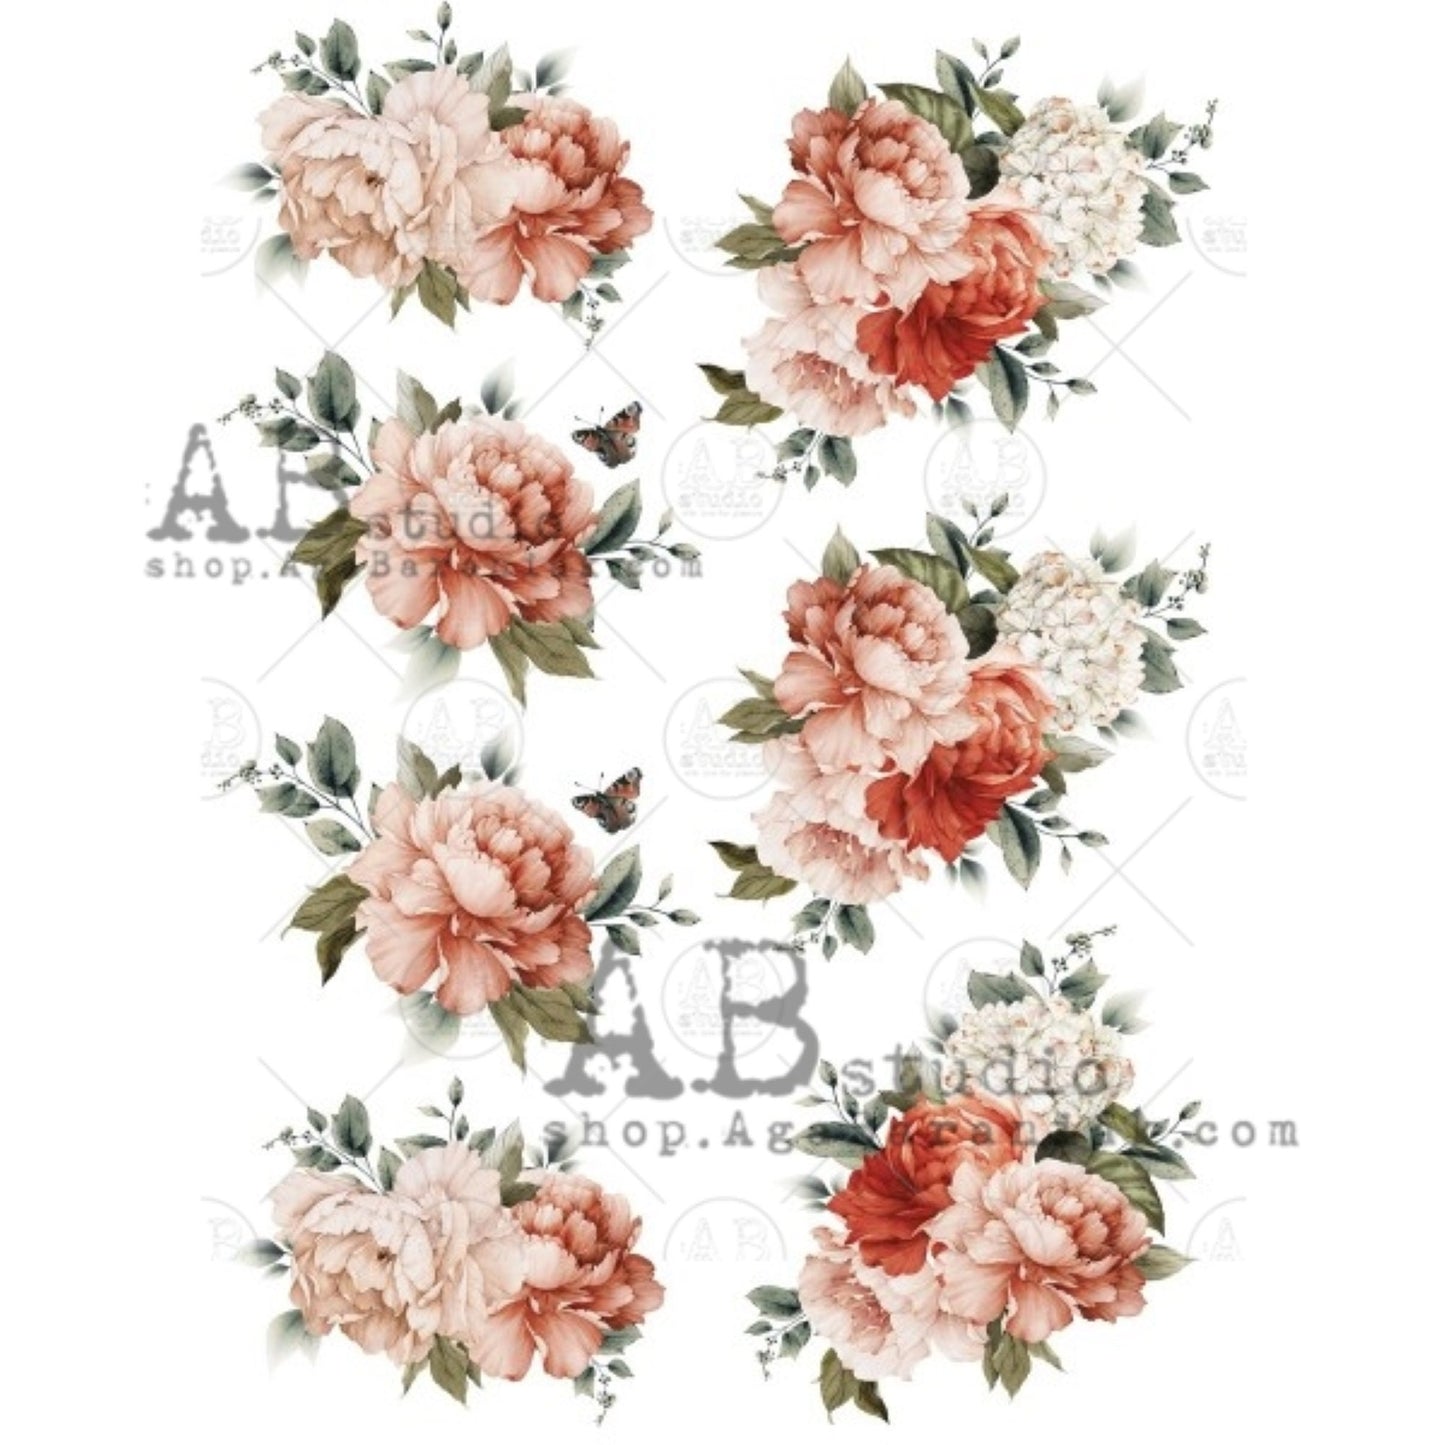 AB Studio Peach Shabby Chic, roses, Floral, bouquets, 0678 Size: A4 - 8.27 X 11.69 inches Rice Paper for Decoupage Imported from Poland